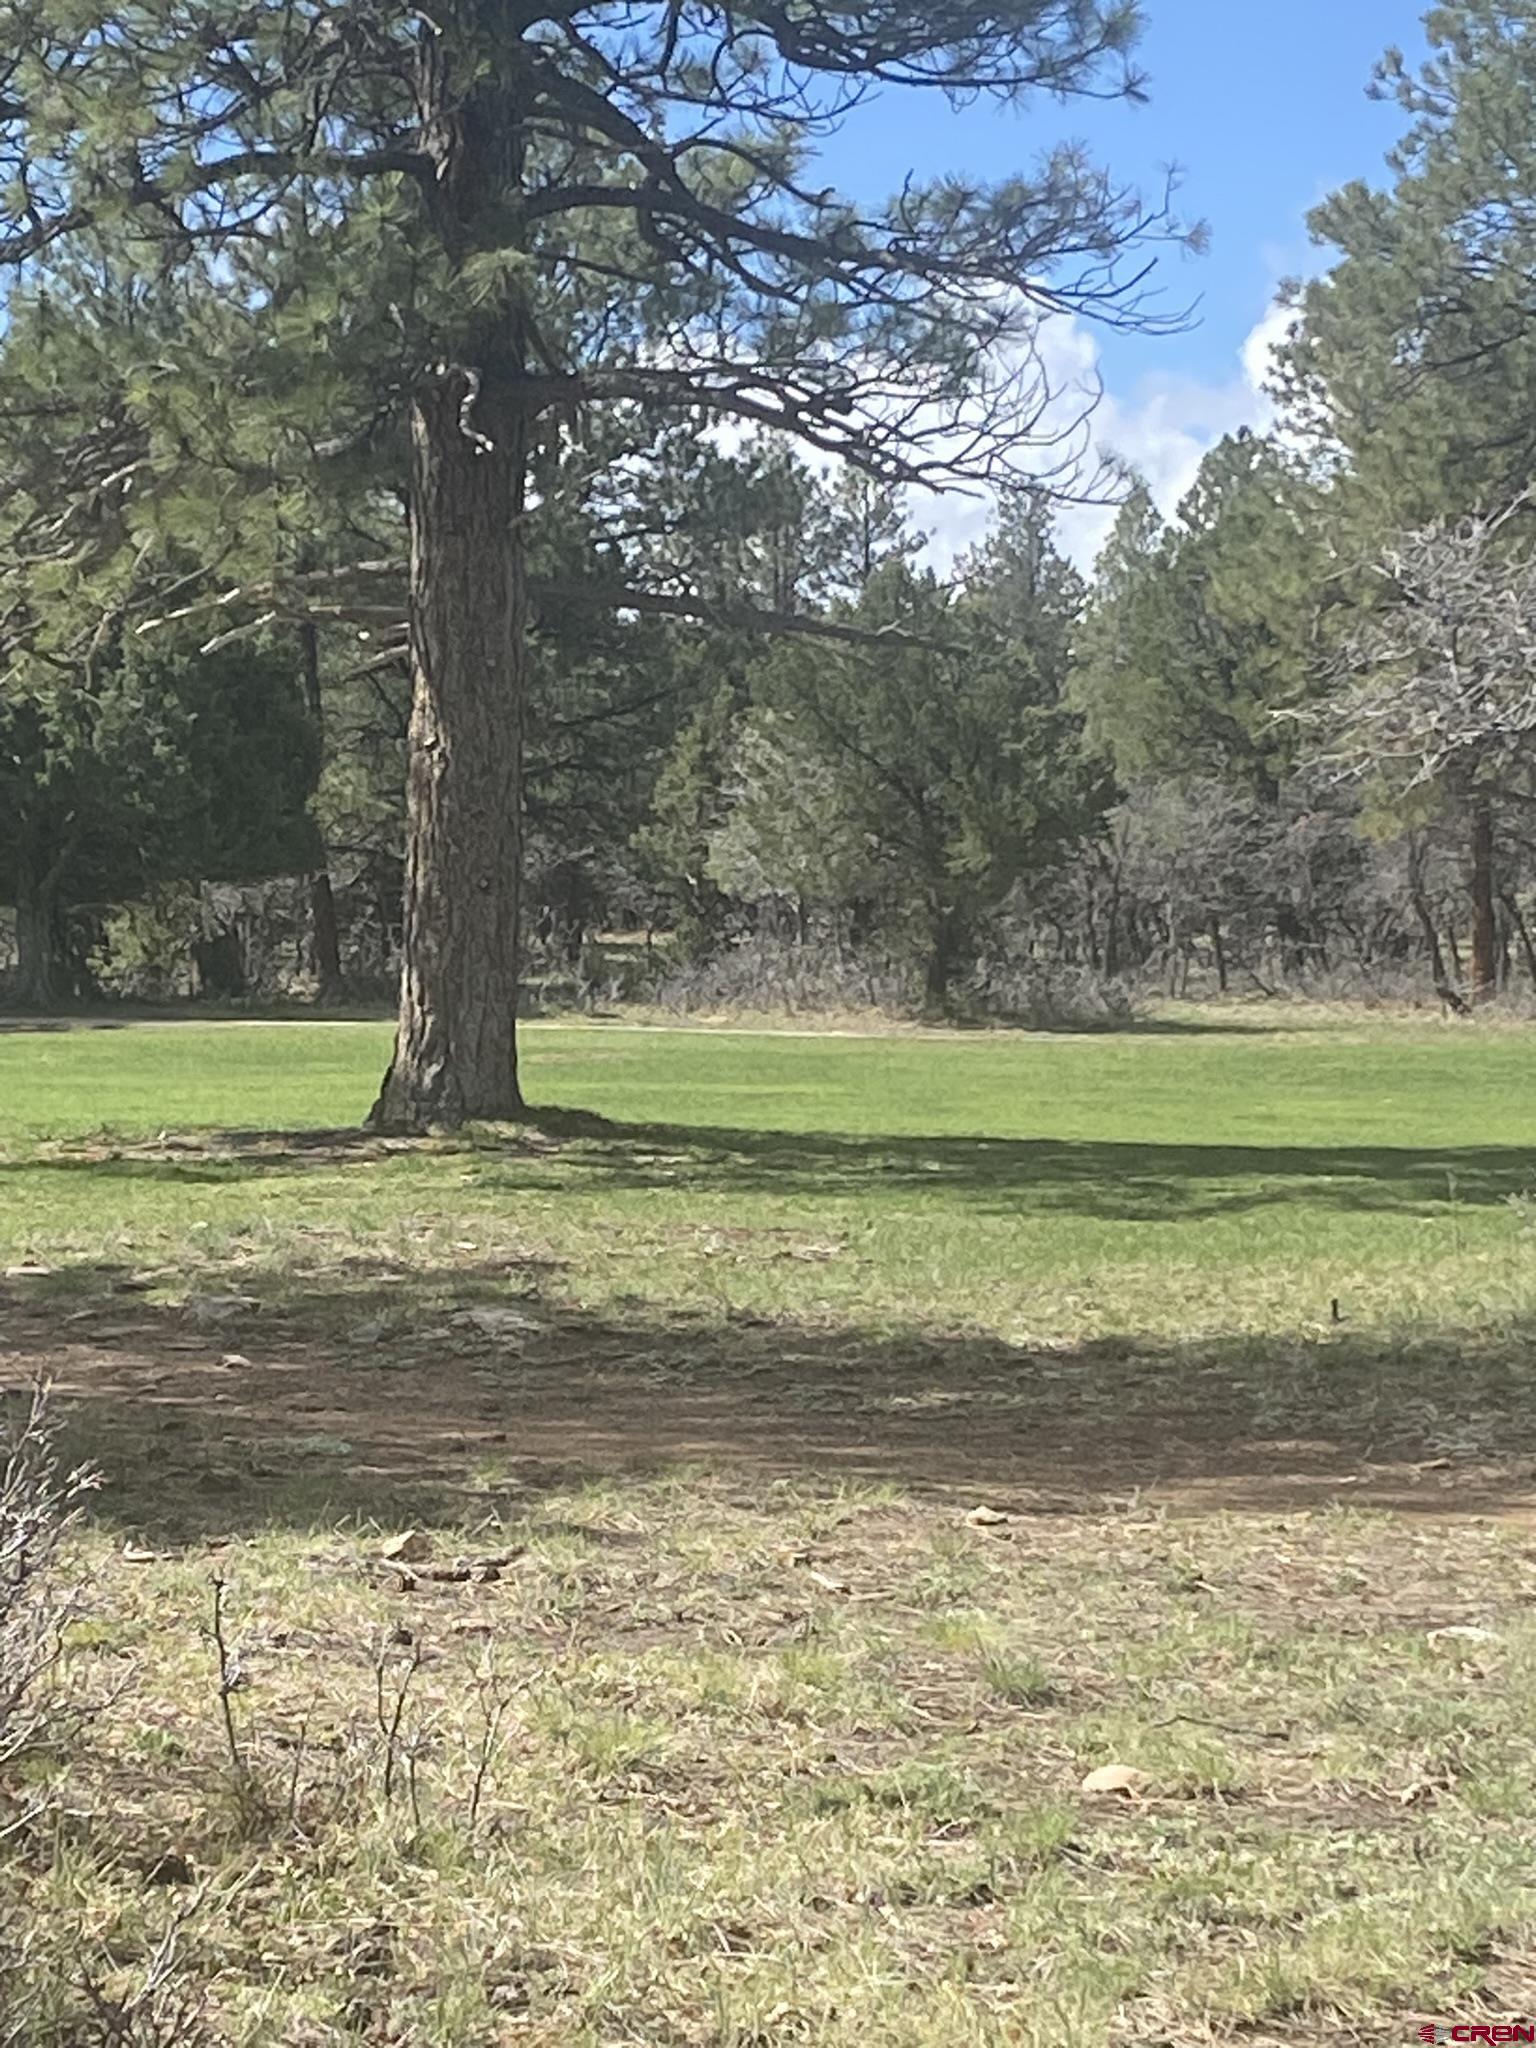 Great Level Lot that backs the 7th Fairway of Divide Ranch & Club Golf Course.  Large Ponderosa Trees and Sneffel's Mountain Range View potential from the South Facing Backyard. All utilities to the lot line including Fiber Optics.    Divide Ranch & Club Golf Course is the perfect spot to get your game on.  Even for those that are not avid golfers there is different scenery from every hole on the course that you do not want to miss out on. In the winter enjoy snowshoeing, cross country skiing and sledding throughout the community.  The clubhouse offers opportunities to meet with your neighbors for a cocktail and a bite to eat.   It is also a gorgeous backdrop for a special events including weddings, birthdays, or other small private parties.  The community is centrally located in Southwestern Colorado within close proximity to every outdoor activity you can imagine.  Enjoy skiing or snowboarding in world renowned Telluride CO in the winter and take advantage of the many festivals offered throughout the summer including, Film, Wine, Yoga, Blue Grass ,Blue‘s & Brew’s and many more .  Ouray, known as the Little Switzerland of the US,  is within 15 min where you can soak in the Hot Springs while looking up at the mountains and hike or drive to waterfalls. Fly fishing, boating, kayaking, paddle boarding, hiking, mountain biking and off-roading is literally minutes away from your front door.  When you are done playing in the mountains stop by one of the local breweries or dine in one of the restaurants.  Divide Ranch & Club is a hidden gem nestled in the San Juan’s and is the perfect spot for a forever home or a second home.